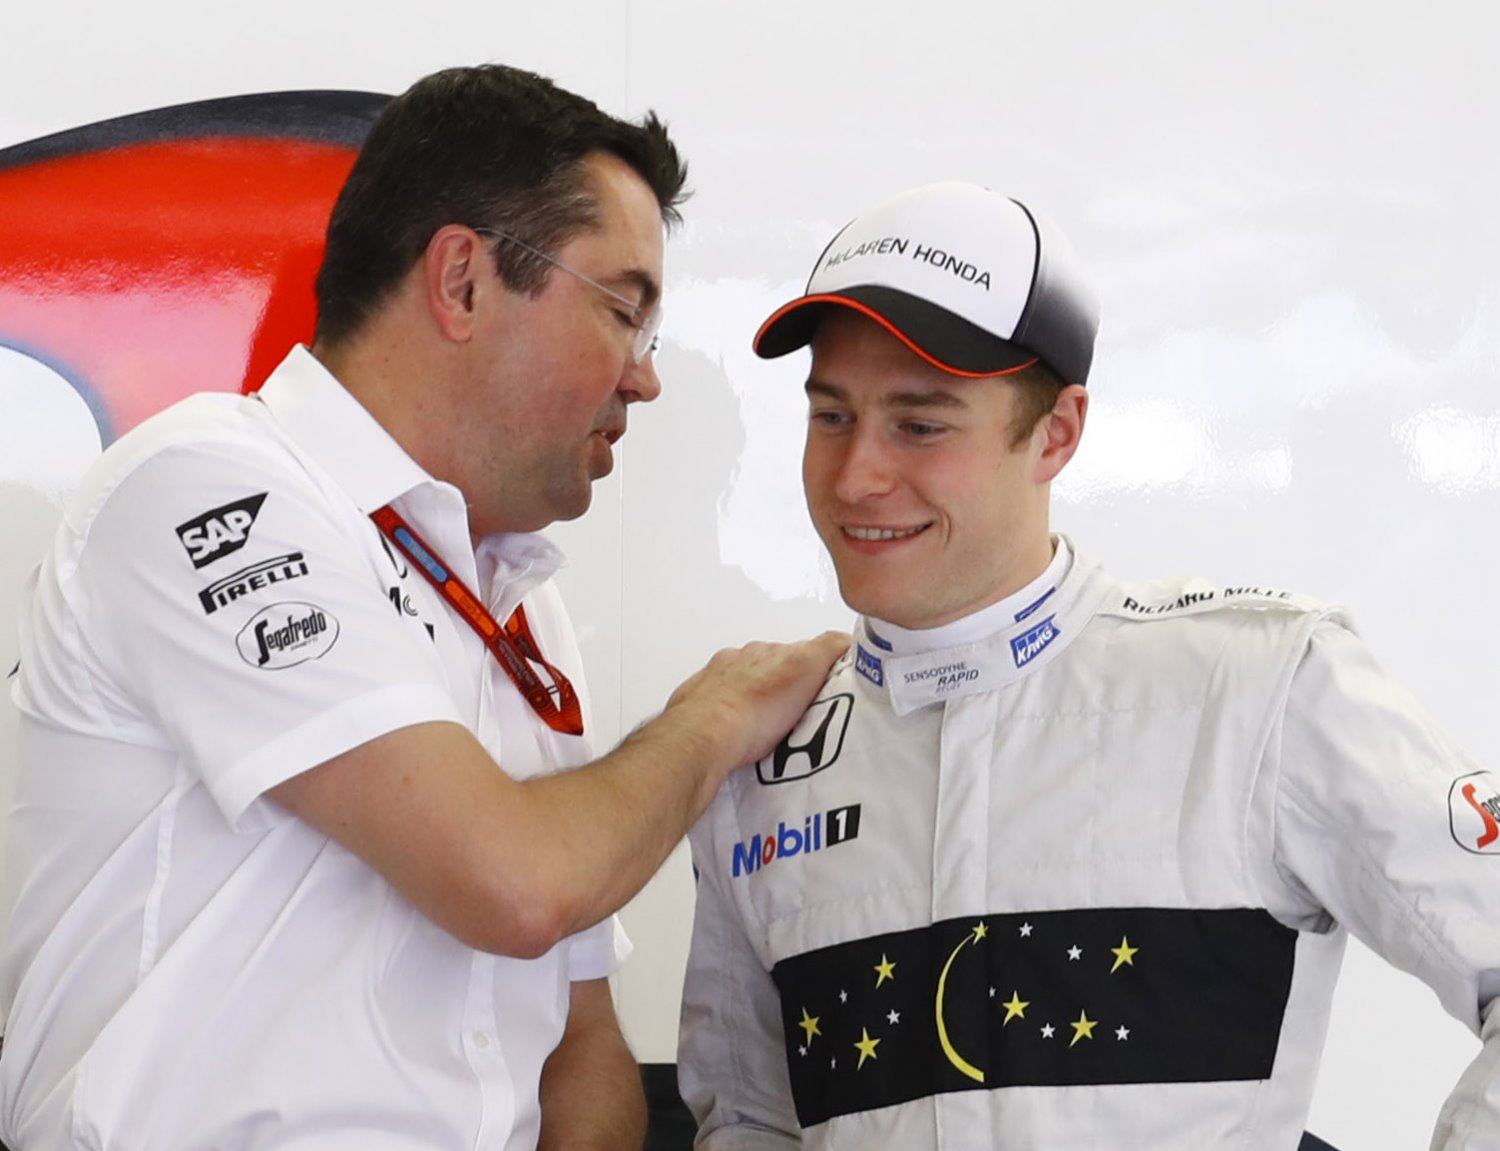 Eric Boullier and his reserve driver Vandoorne